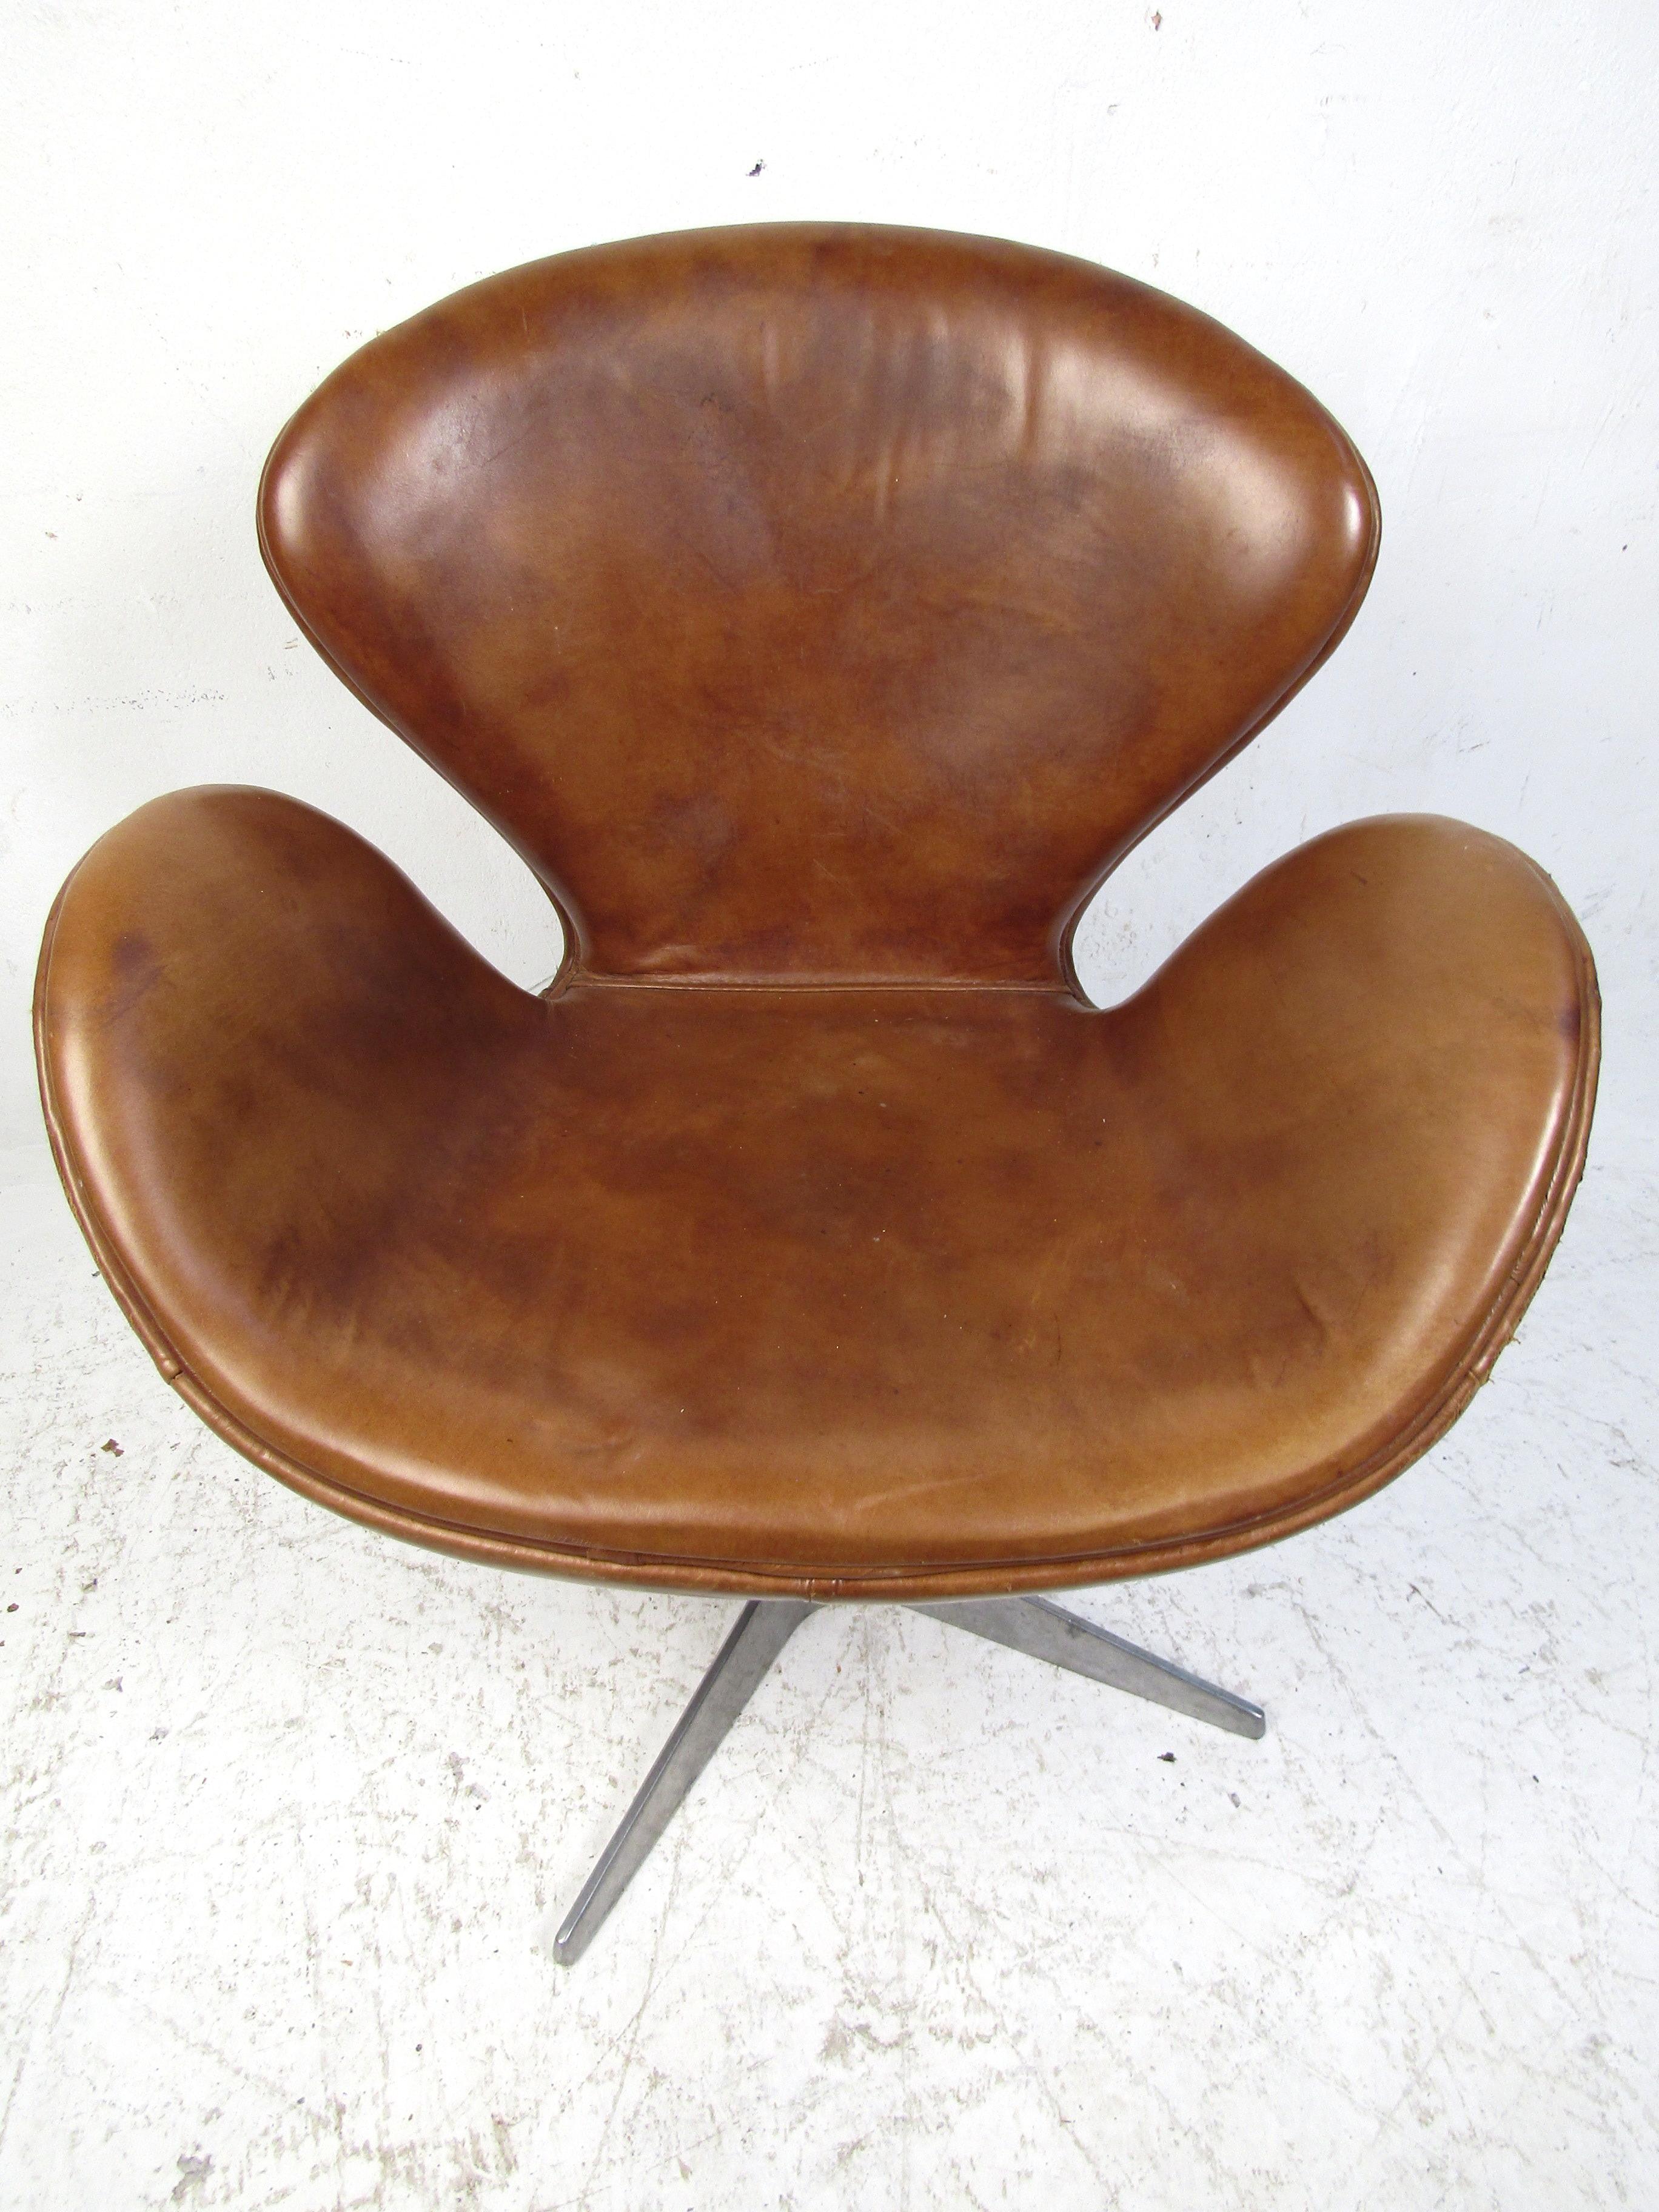 This beautiful Arne Jacobson brown leather swan chair is a must-have for any game or showroom. With plush gently worn leather it is incredibly comfortable. The mid-century design will work with many different concepts, while perfectly accenting your